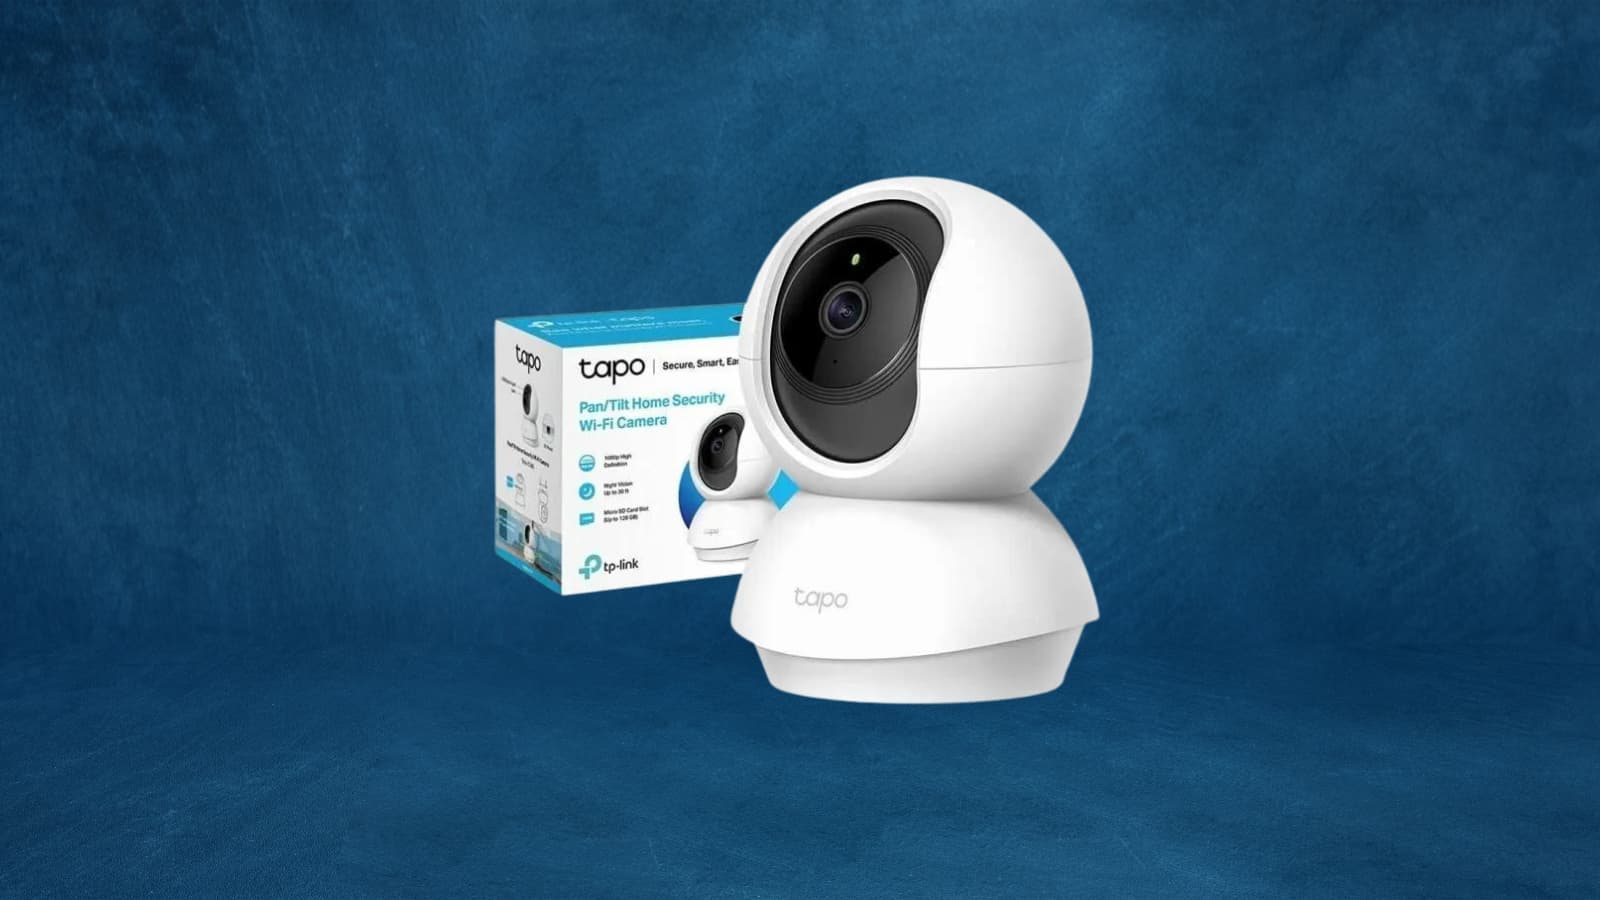 Costing less than 30 euros, this security camera detects movements even in the dark.